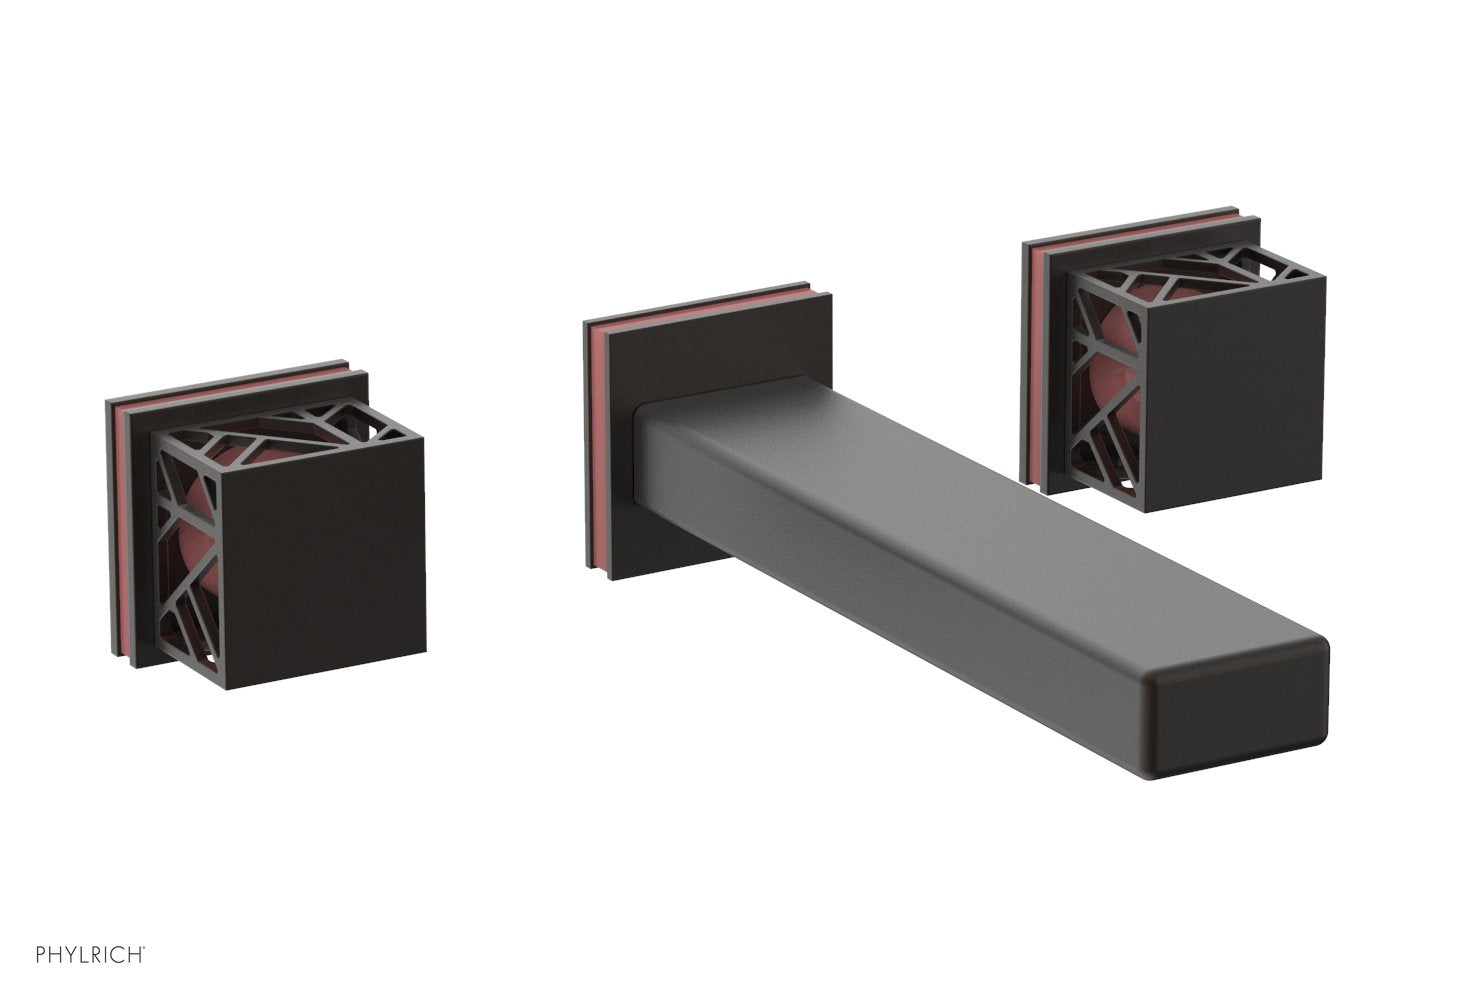 Phylrich JOLIE Wall Tub Set - Square Handles with "Pink" Accents